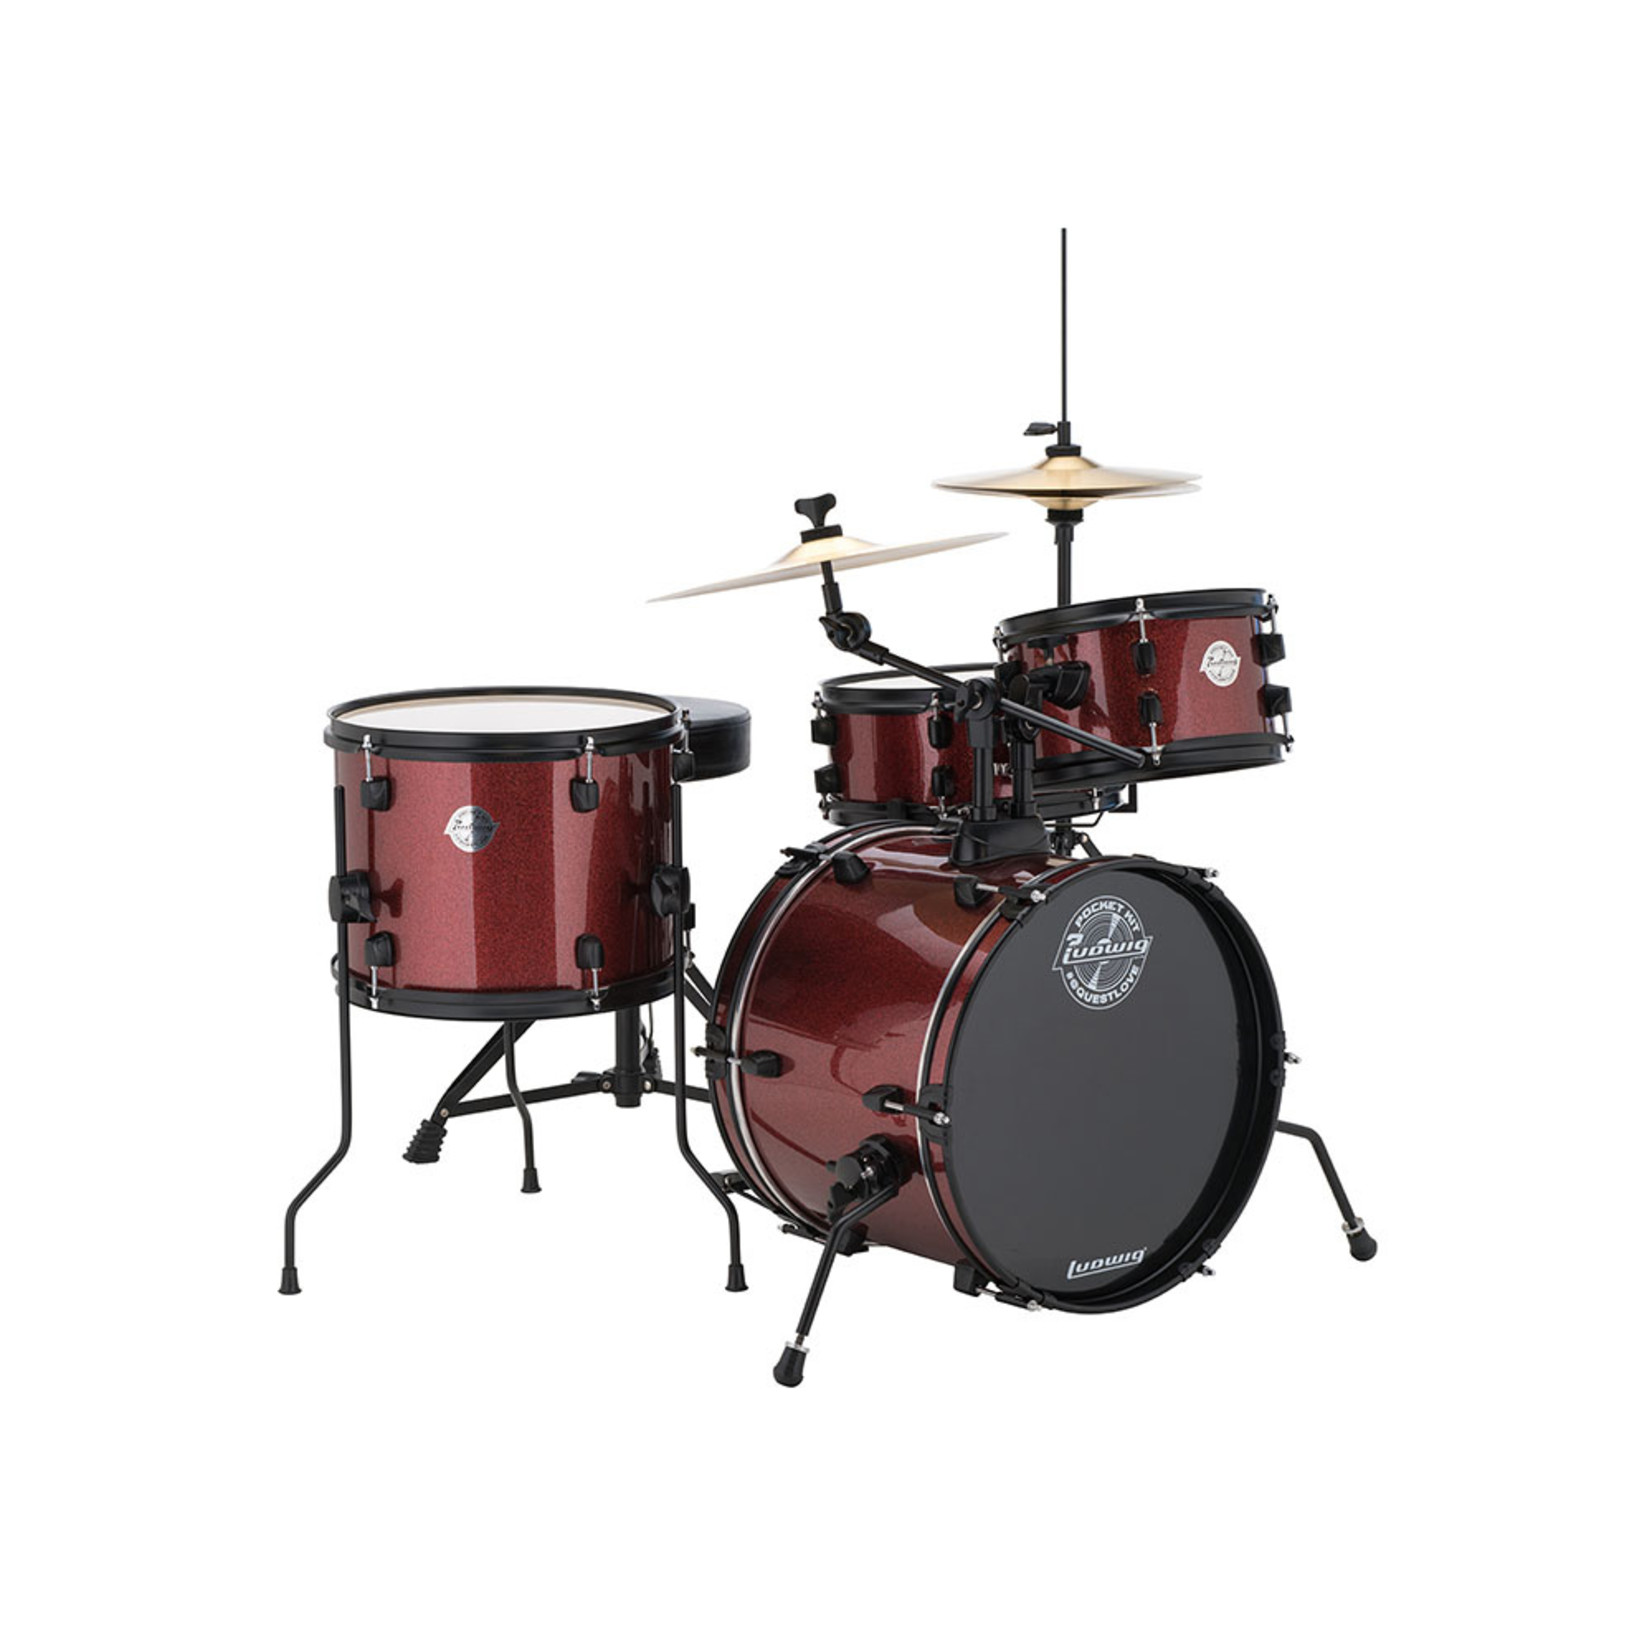 Ludwig Ludwig Pocket Kit by Questlove “Wine Red Sparkle”